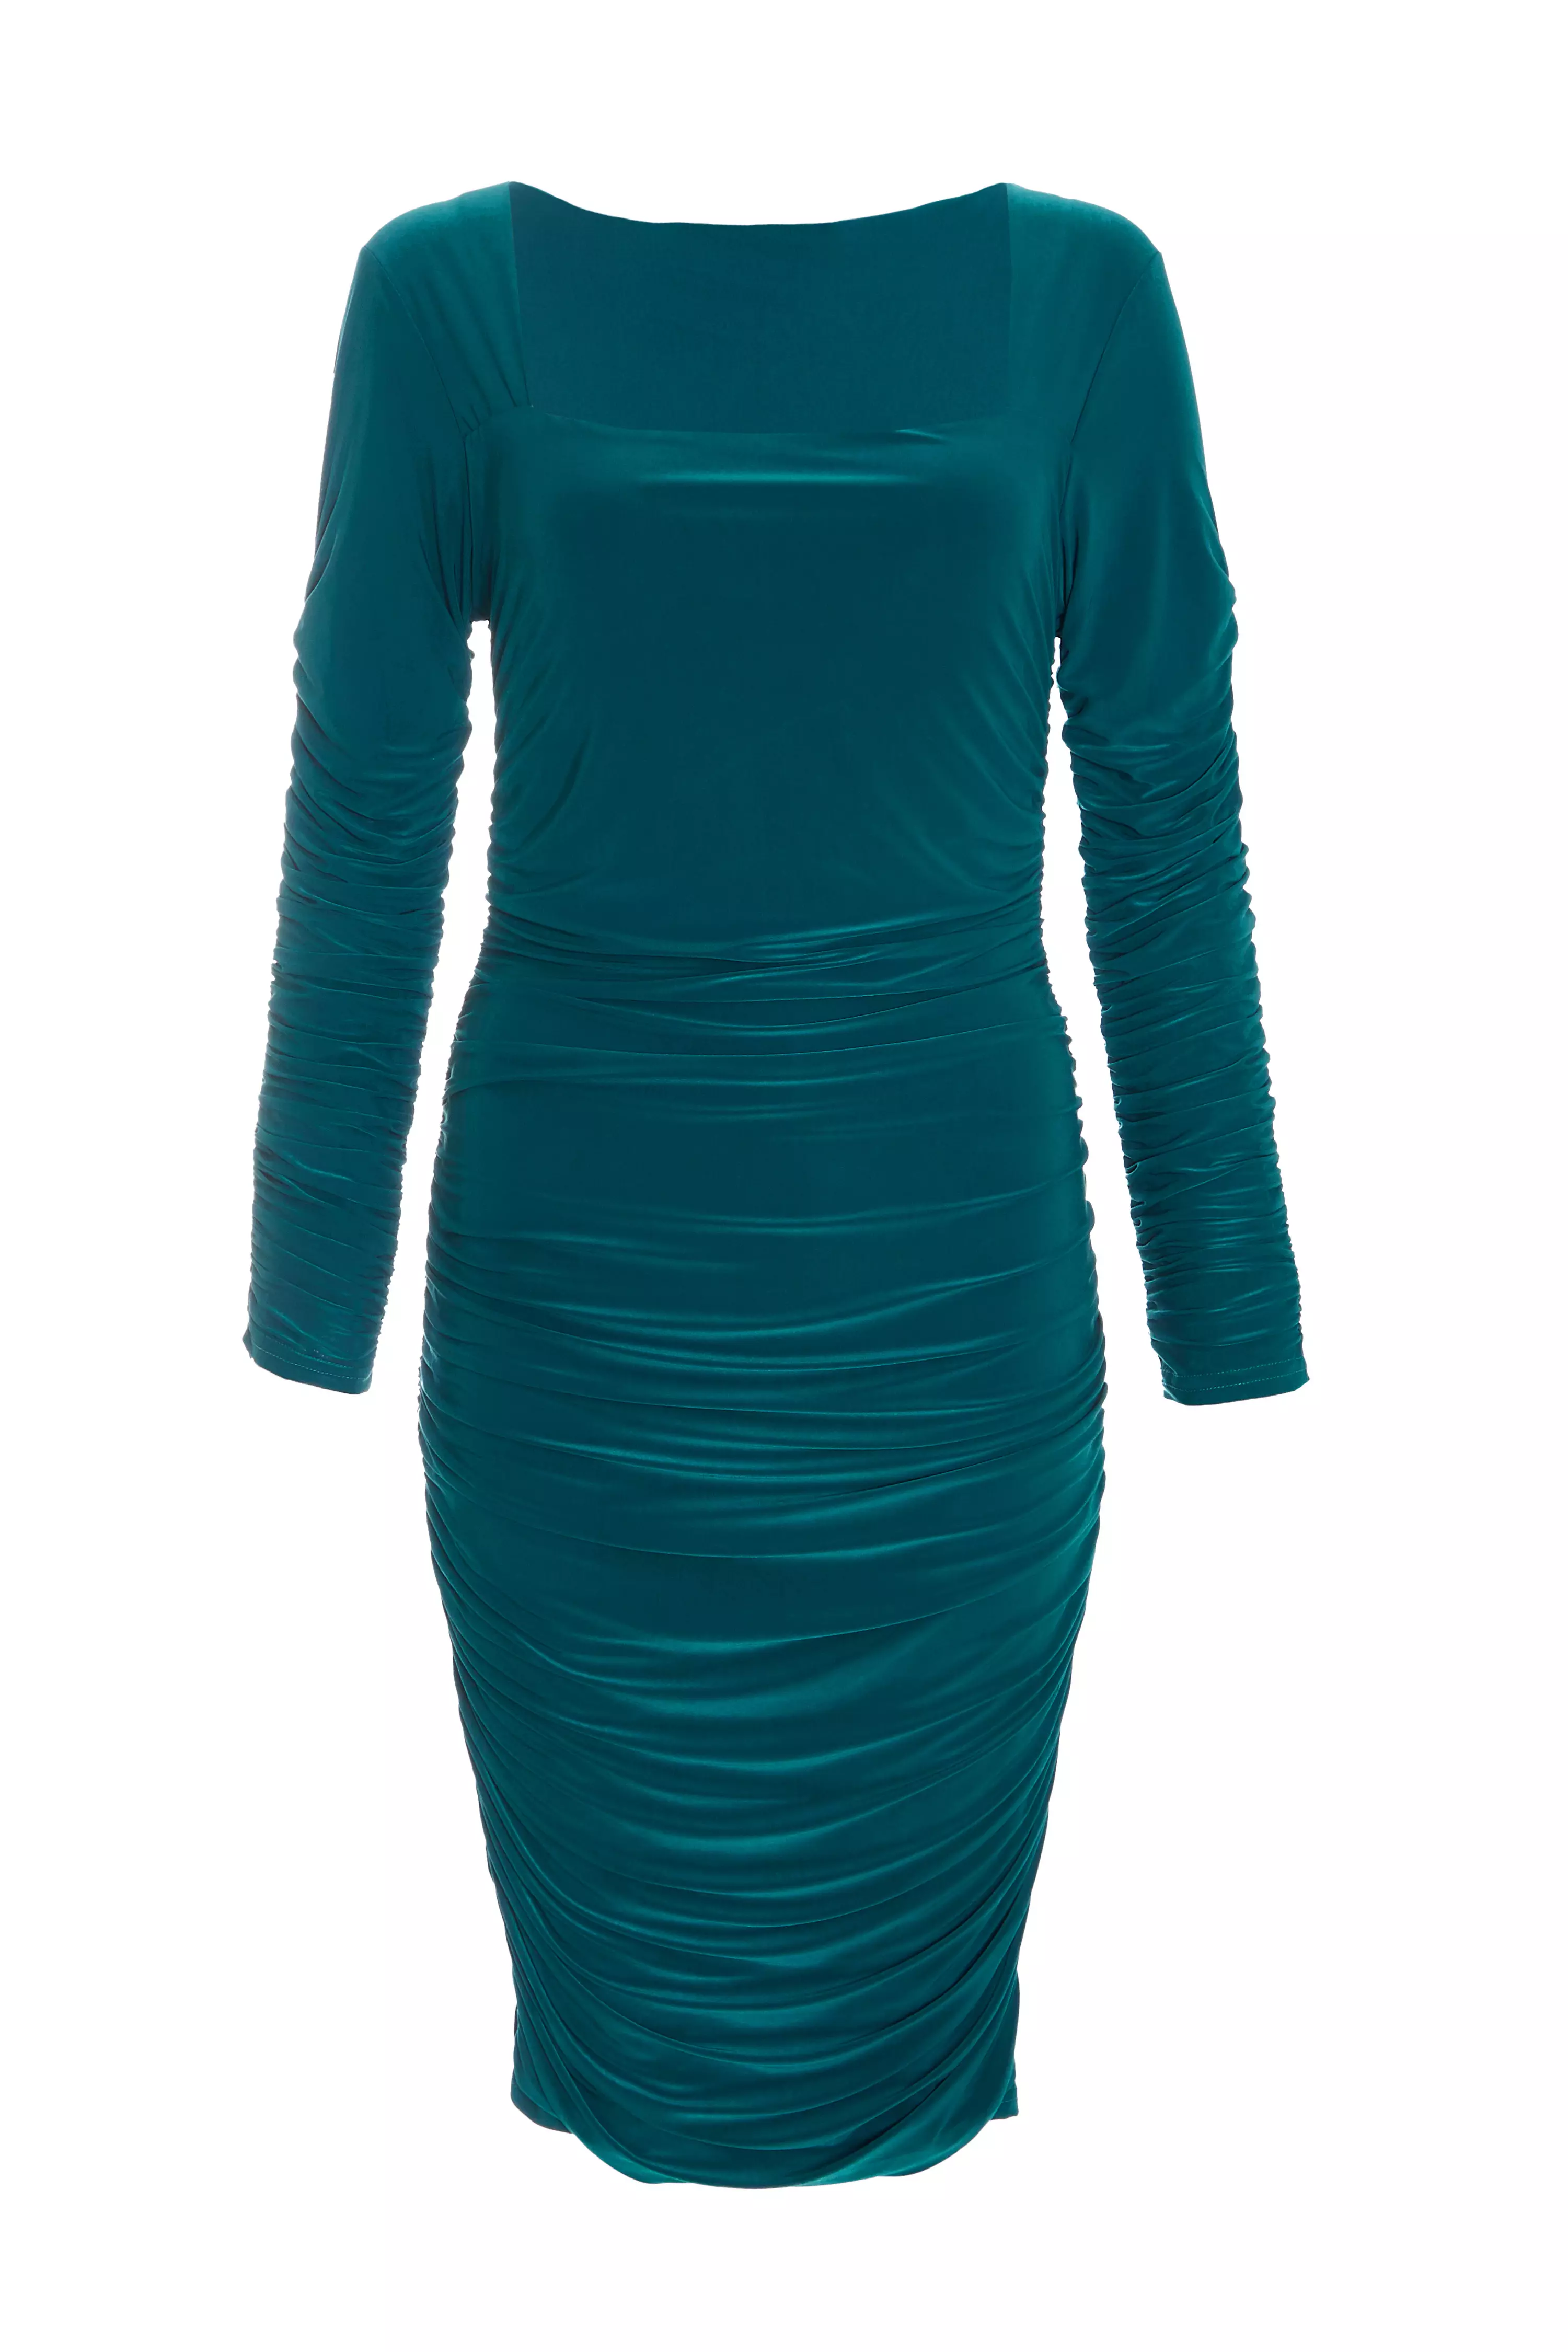 Teal Ruched Long Sleeve Midi Dress - QUIZ Clothing